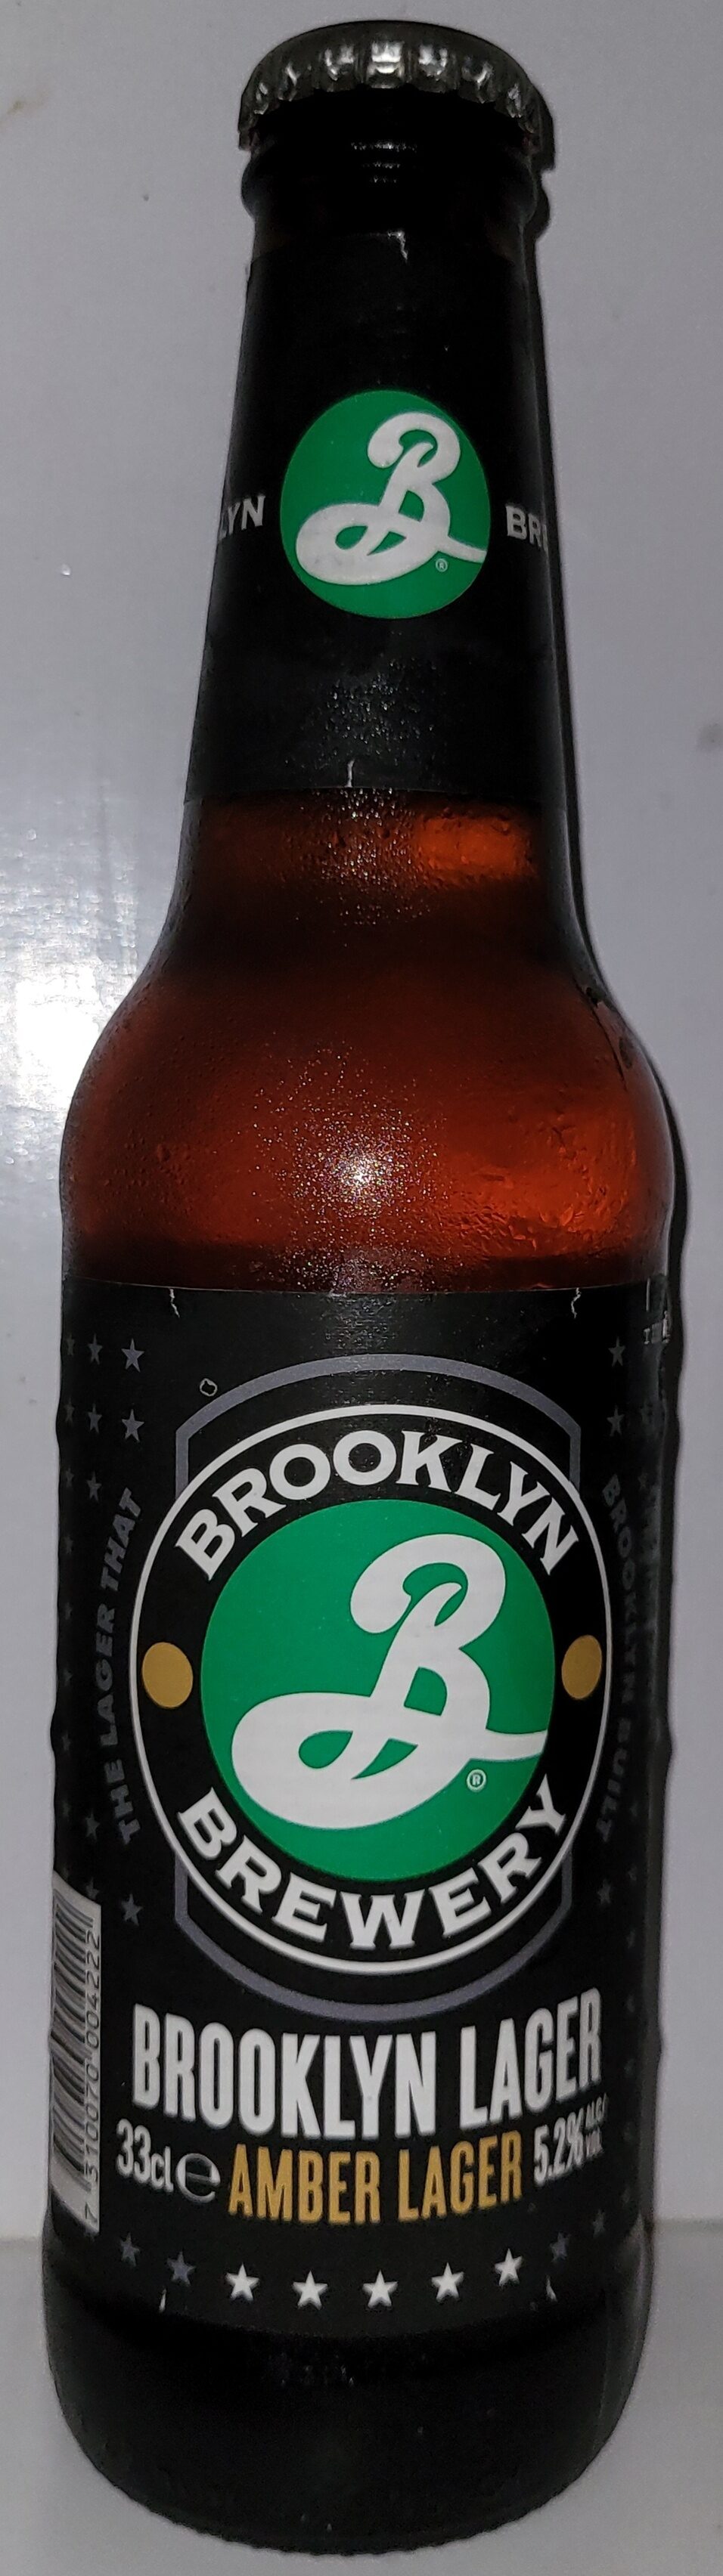 The Brooklyn Amber Lager - Product - fr